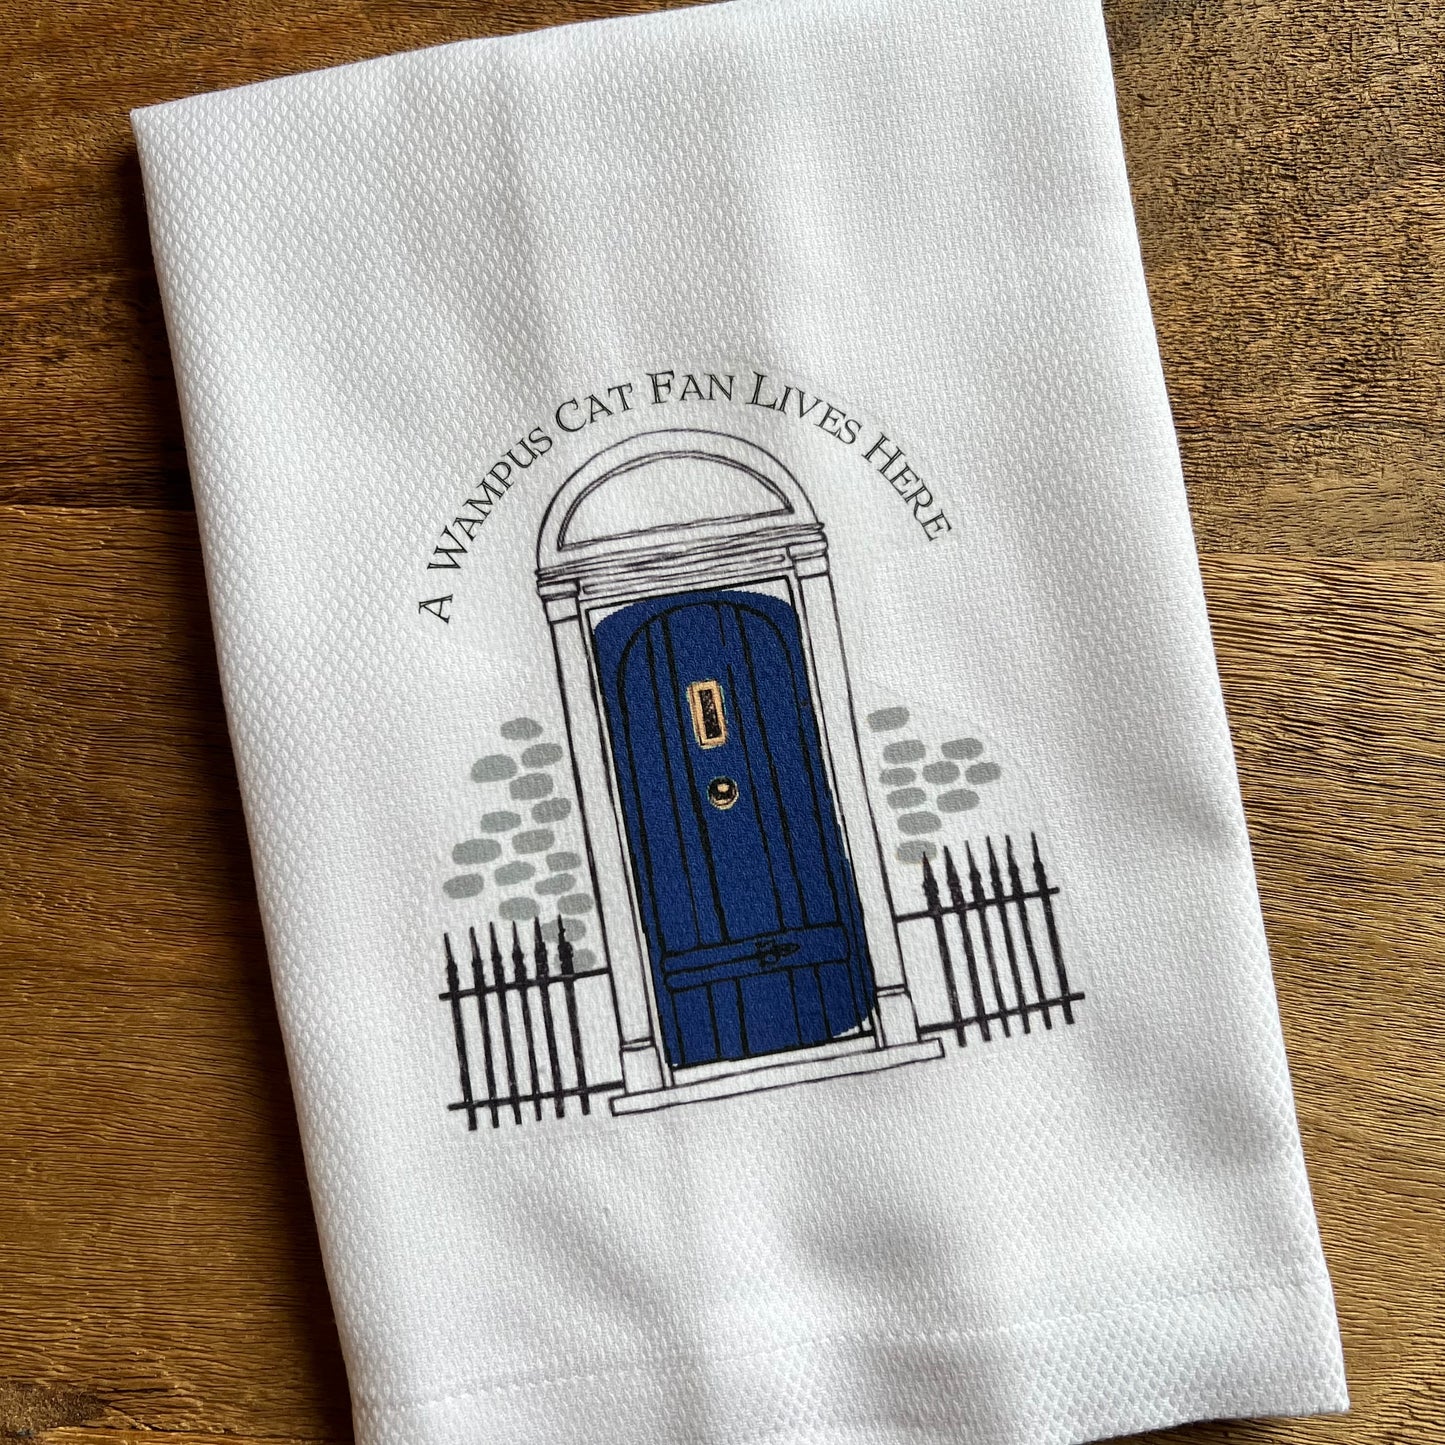 white towel with blue front door design and "a wampus cat fan lives here" across the top.